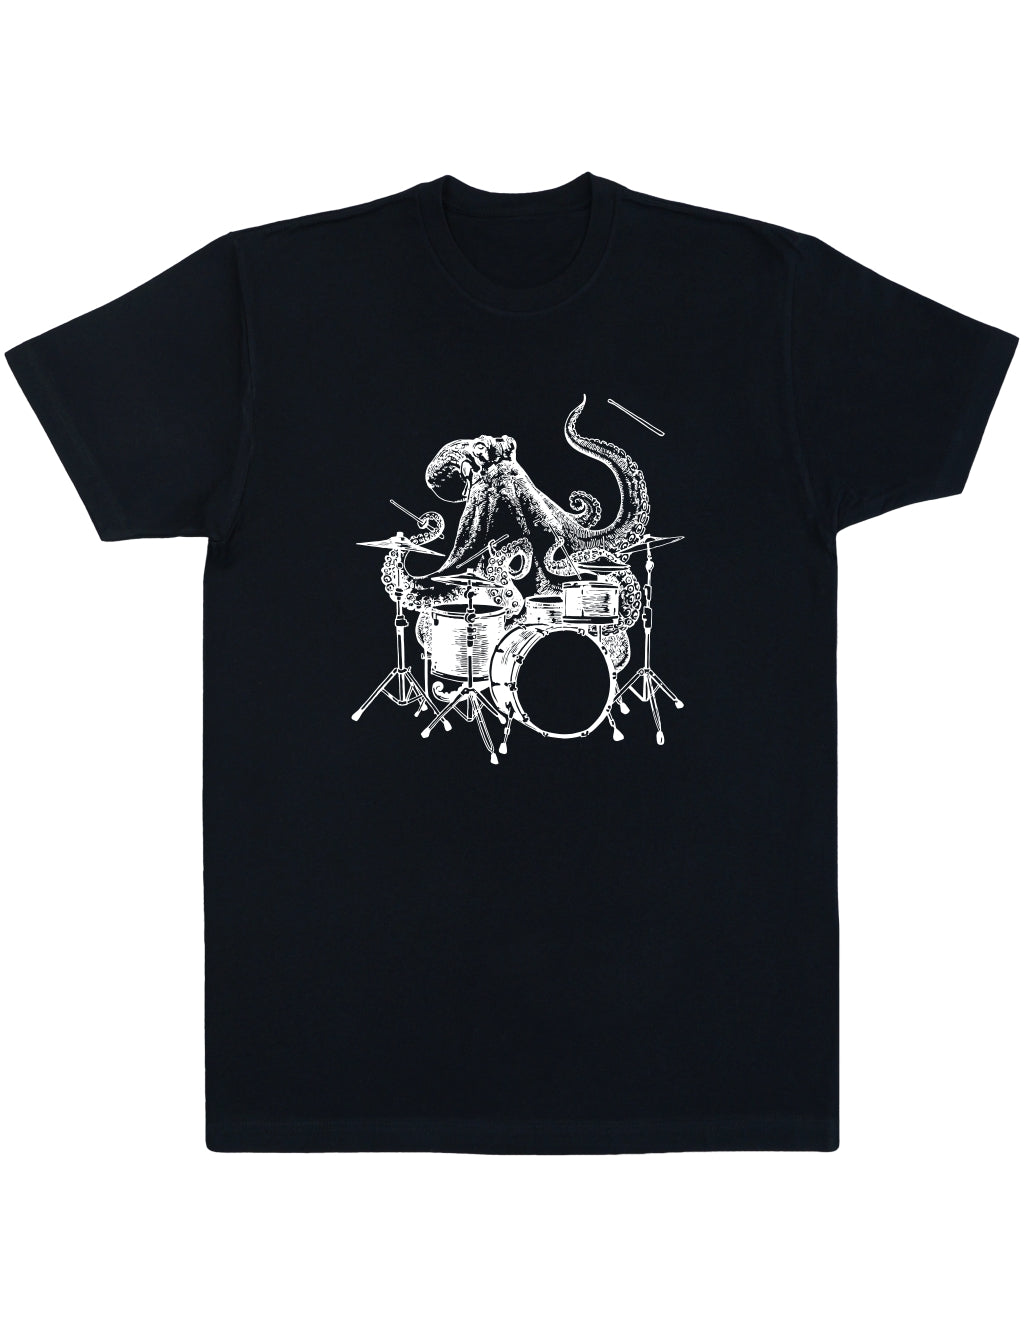 octopus playing drums shirt seembo men unisex black color